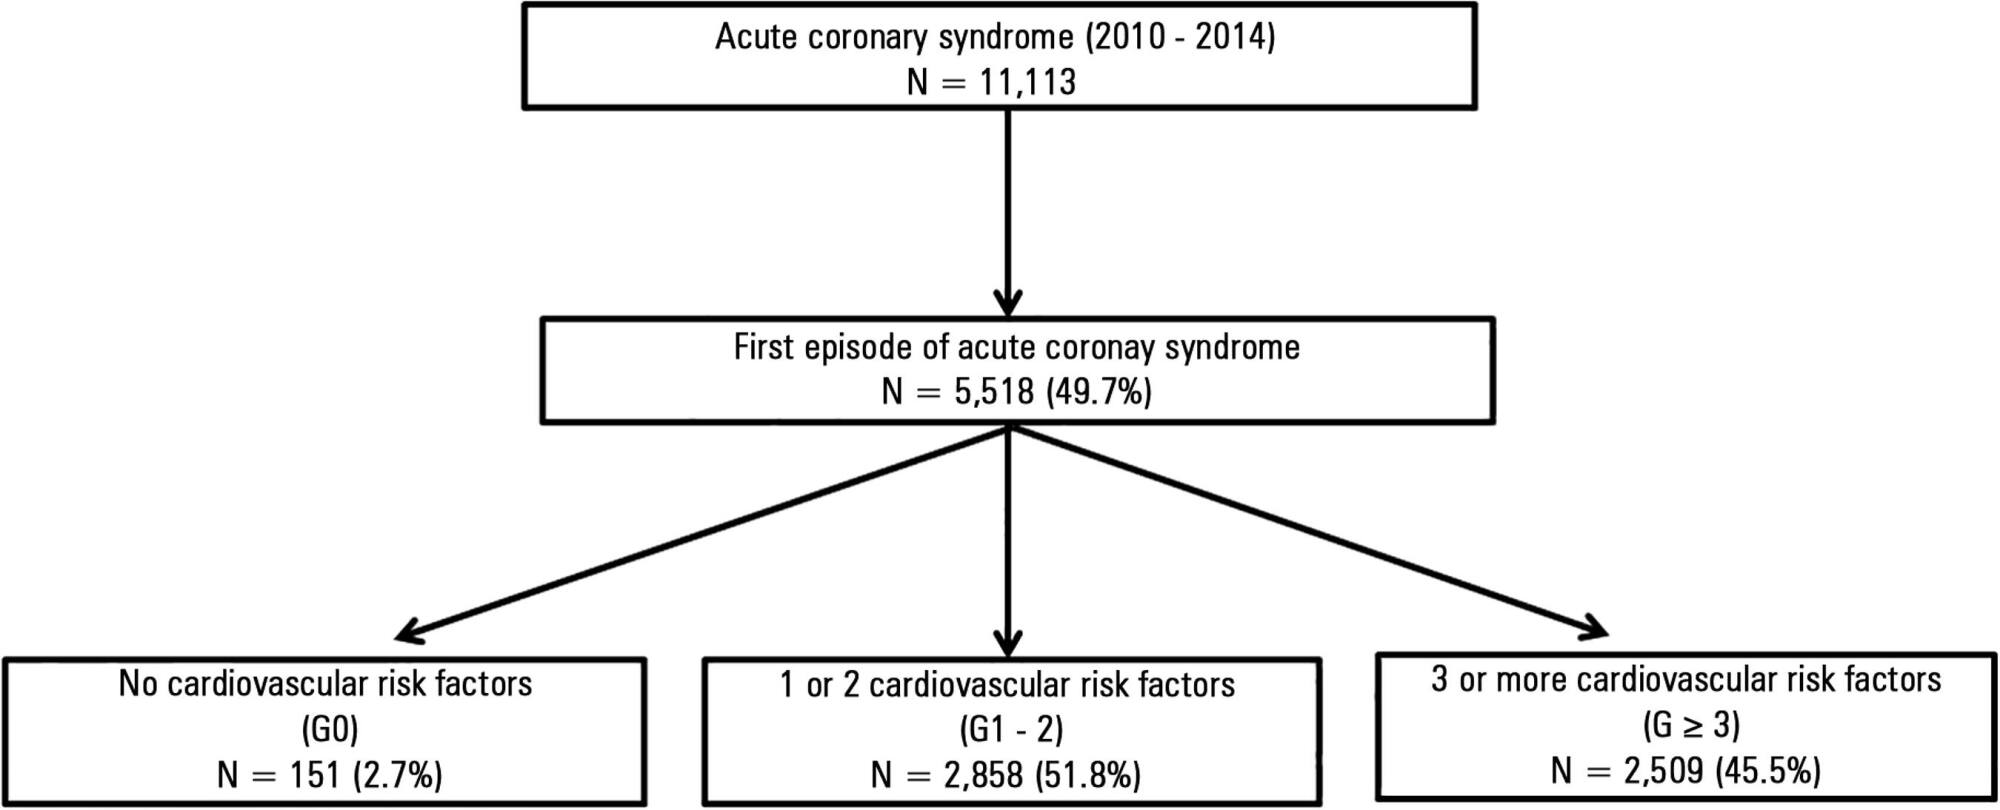 Risk factor paradox in the occurrence of cardiac arrest in acute coronary syndrome patients